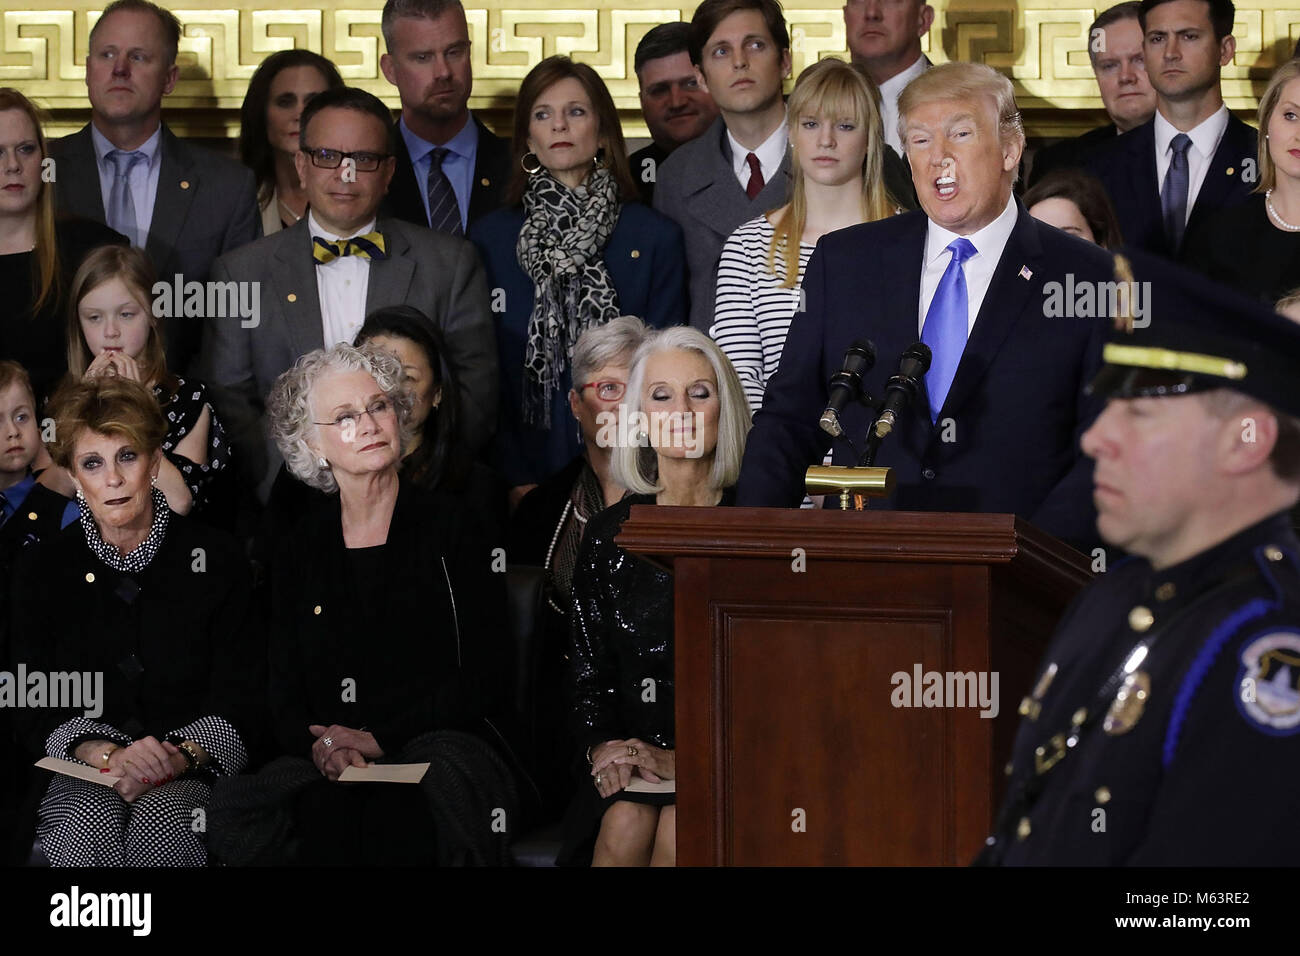 Washington, District of Columbia, USA. 28th Feb, 2018. U.S. President Donald Trump (R) delivers remarks during a memorial ceremony for Christian evangelist and Southern Baptist minister Billy Graham as his daughters (L-E) Gigi Graham, Ruth Graham and Anne Graham Lotz listen in honor in the U.S. Capitol Rotunda February 28, 2018 in Washington, DC. A spiritual counselor for every president from Harry Truman to Barack Obama and other world leaders for more than 60 years, Graham died February 21 at the age of 99. Credit: Chip Somodevilla / Stock Photo